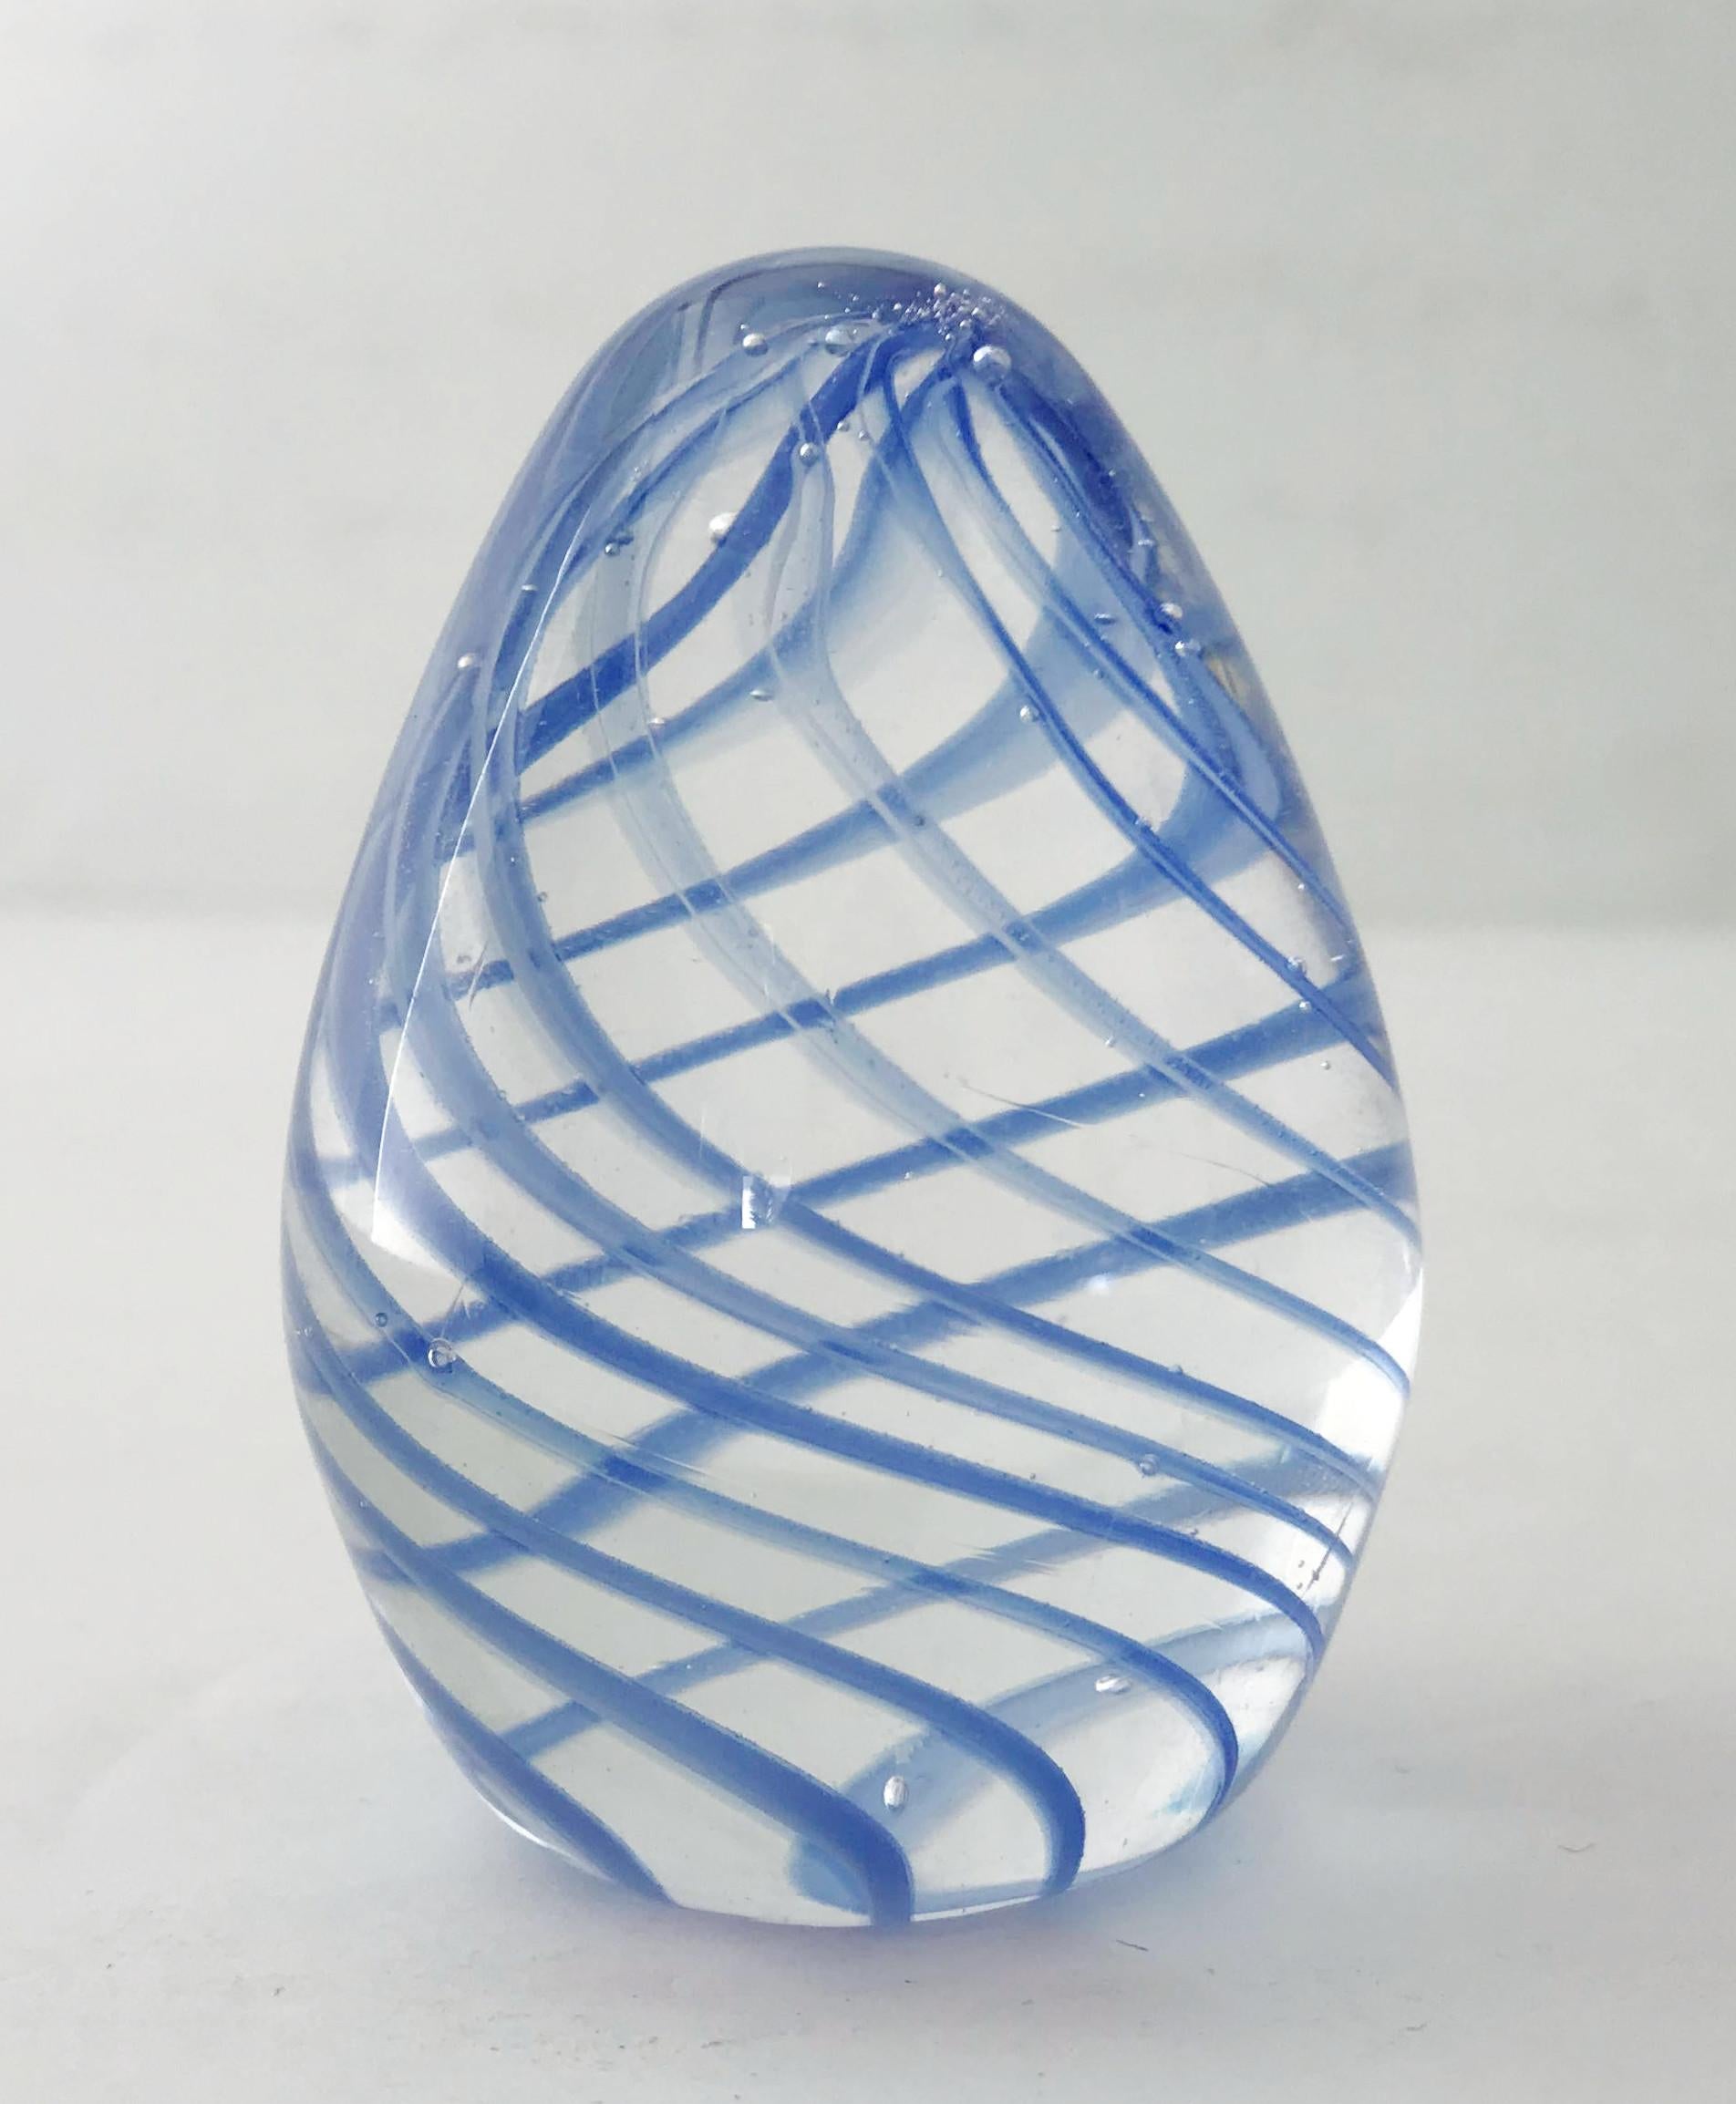 Vintage Italian egg shaped Murano glass paperweight hand blown with blue swirls / Made in Italy, circa 1960s.
Measures: diameter 1.75 inches / height 2.5 inches
1 in stock in Palm Springs ON 50% OFF SALE for $149 !
Order reference #: FABIOLTD